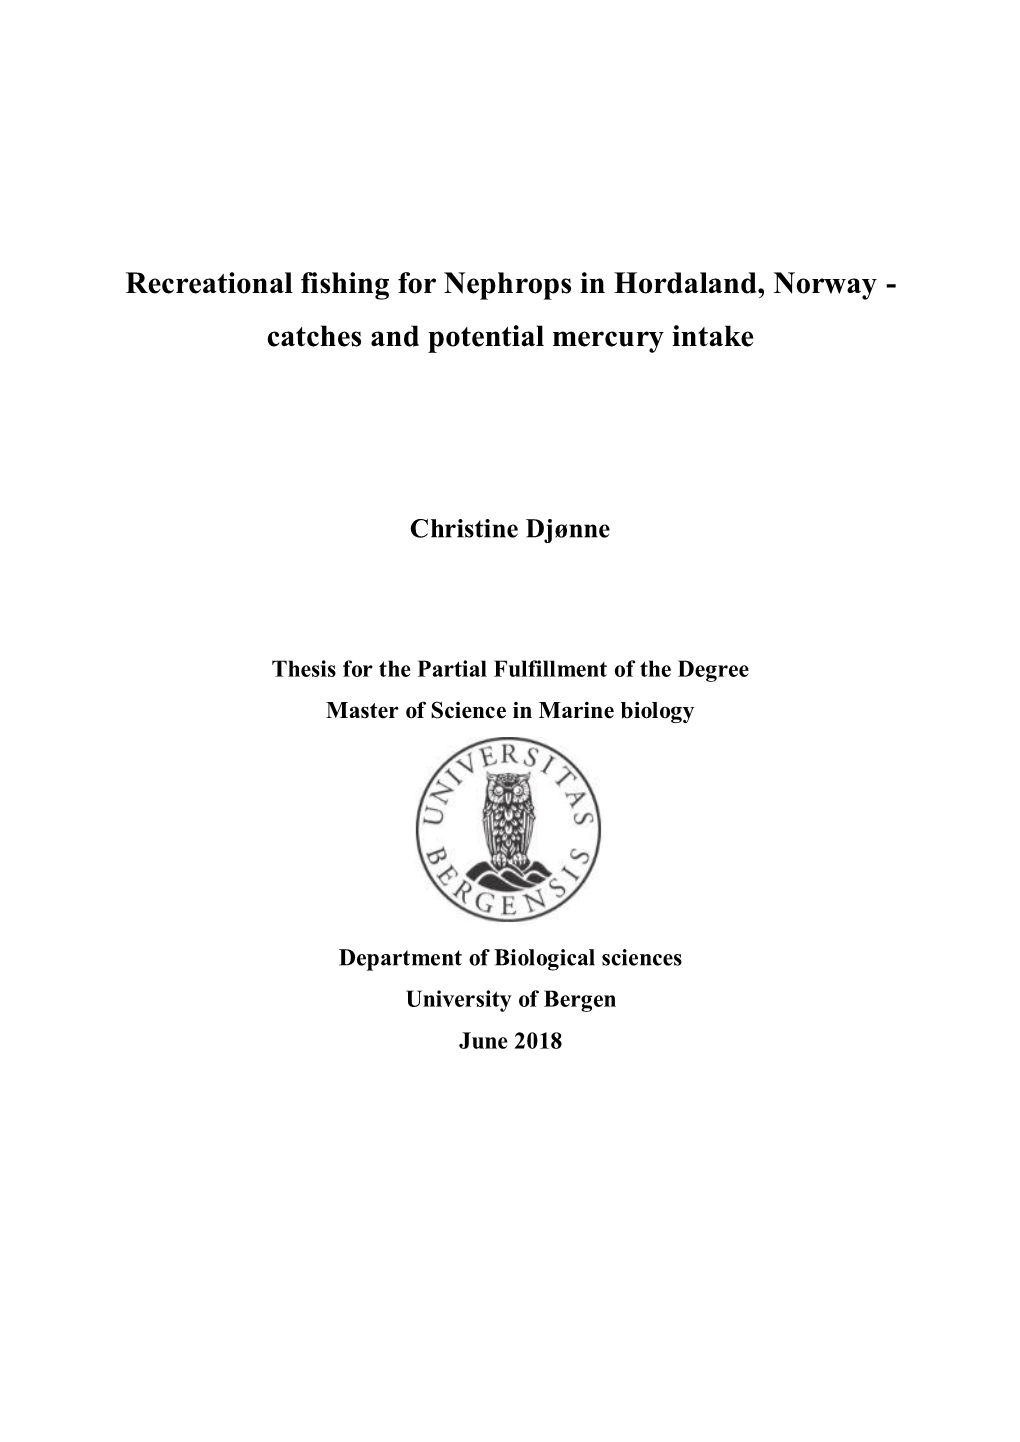 Recreational Fishing for Nephrops in Hordaland, Norway - Catches and Potential Mercury Intake